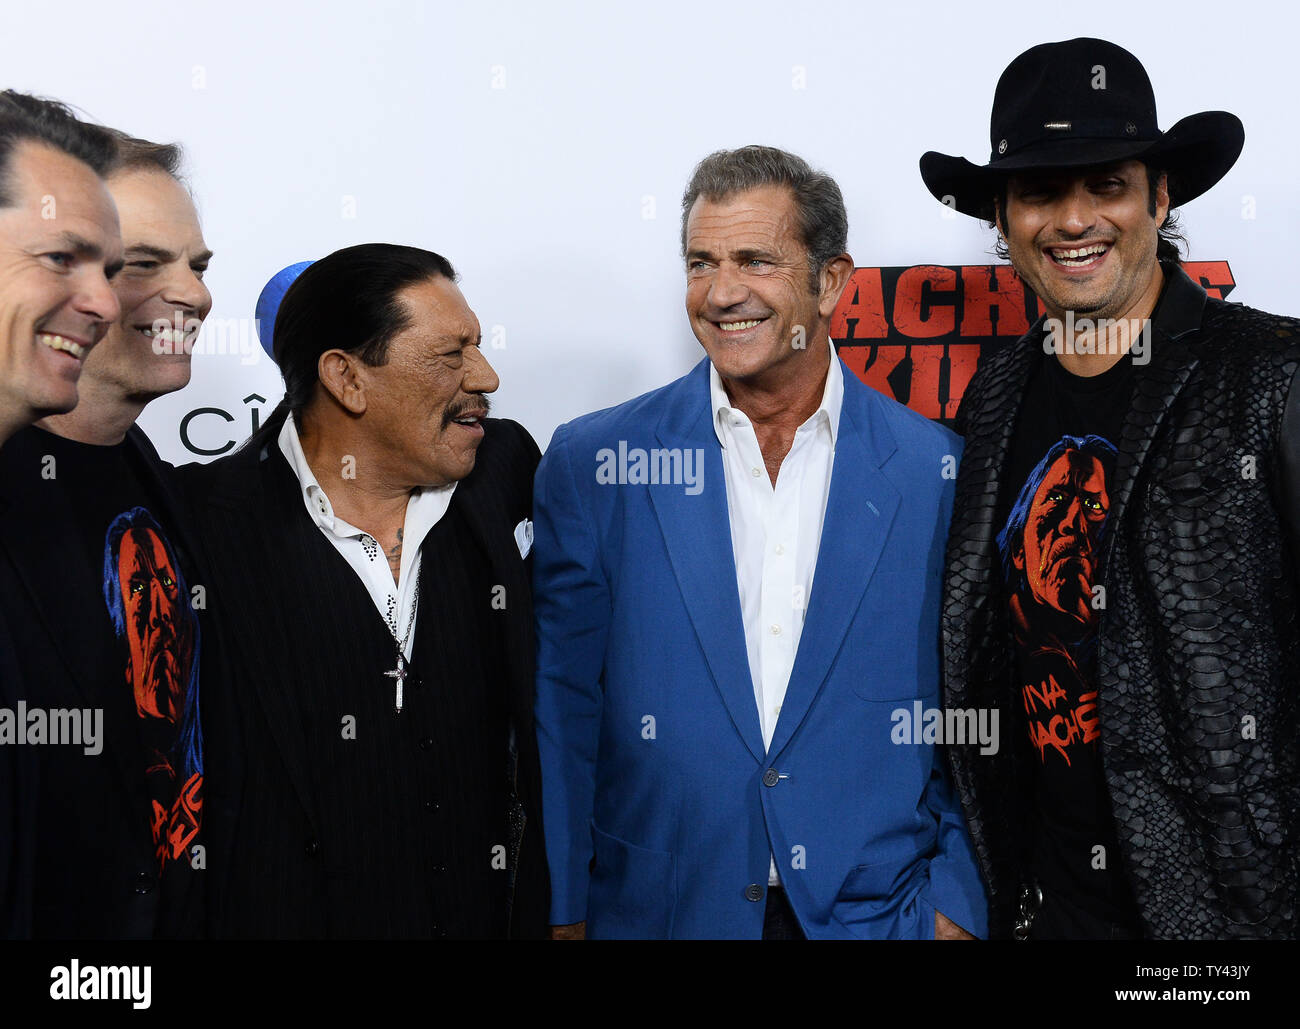 Cast members Danny Trejo, Mel Gibson, and director Robert Rodriguez attend  the premiere of the motion picture crime thriller "Machete Kills" at  Regency Cinemas LA Live in Los Angeles on October 2,